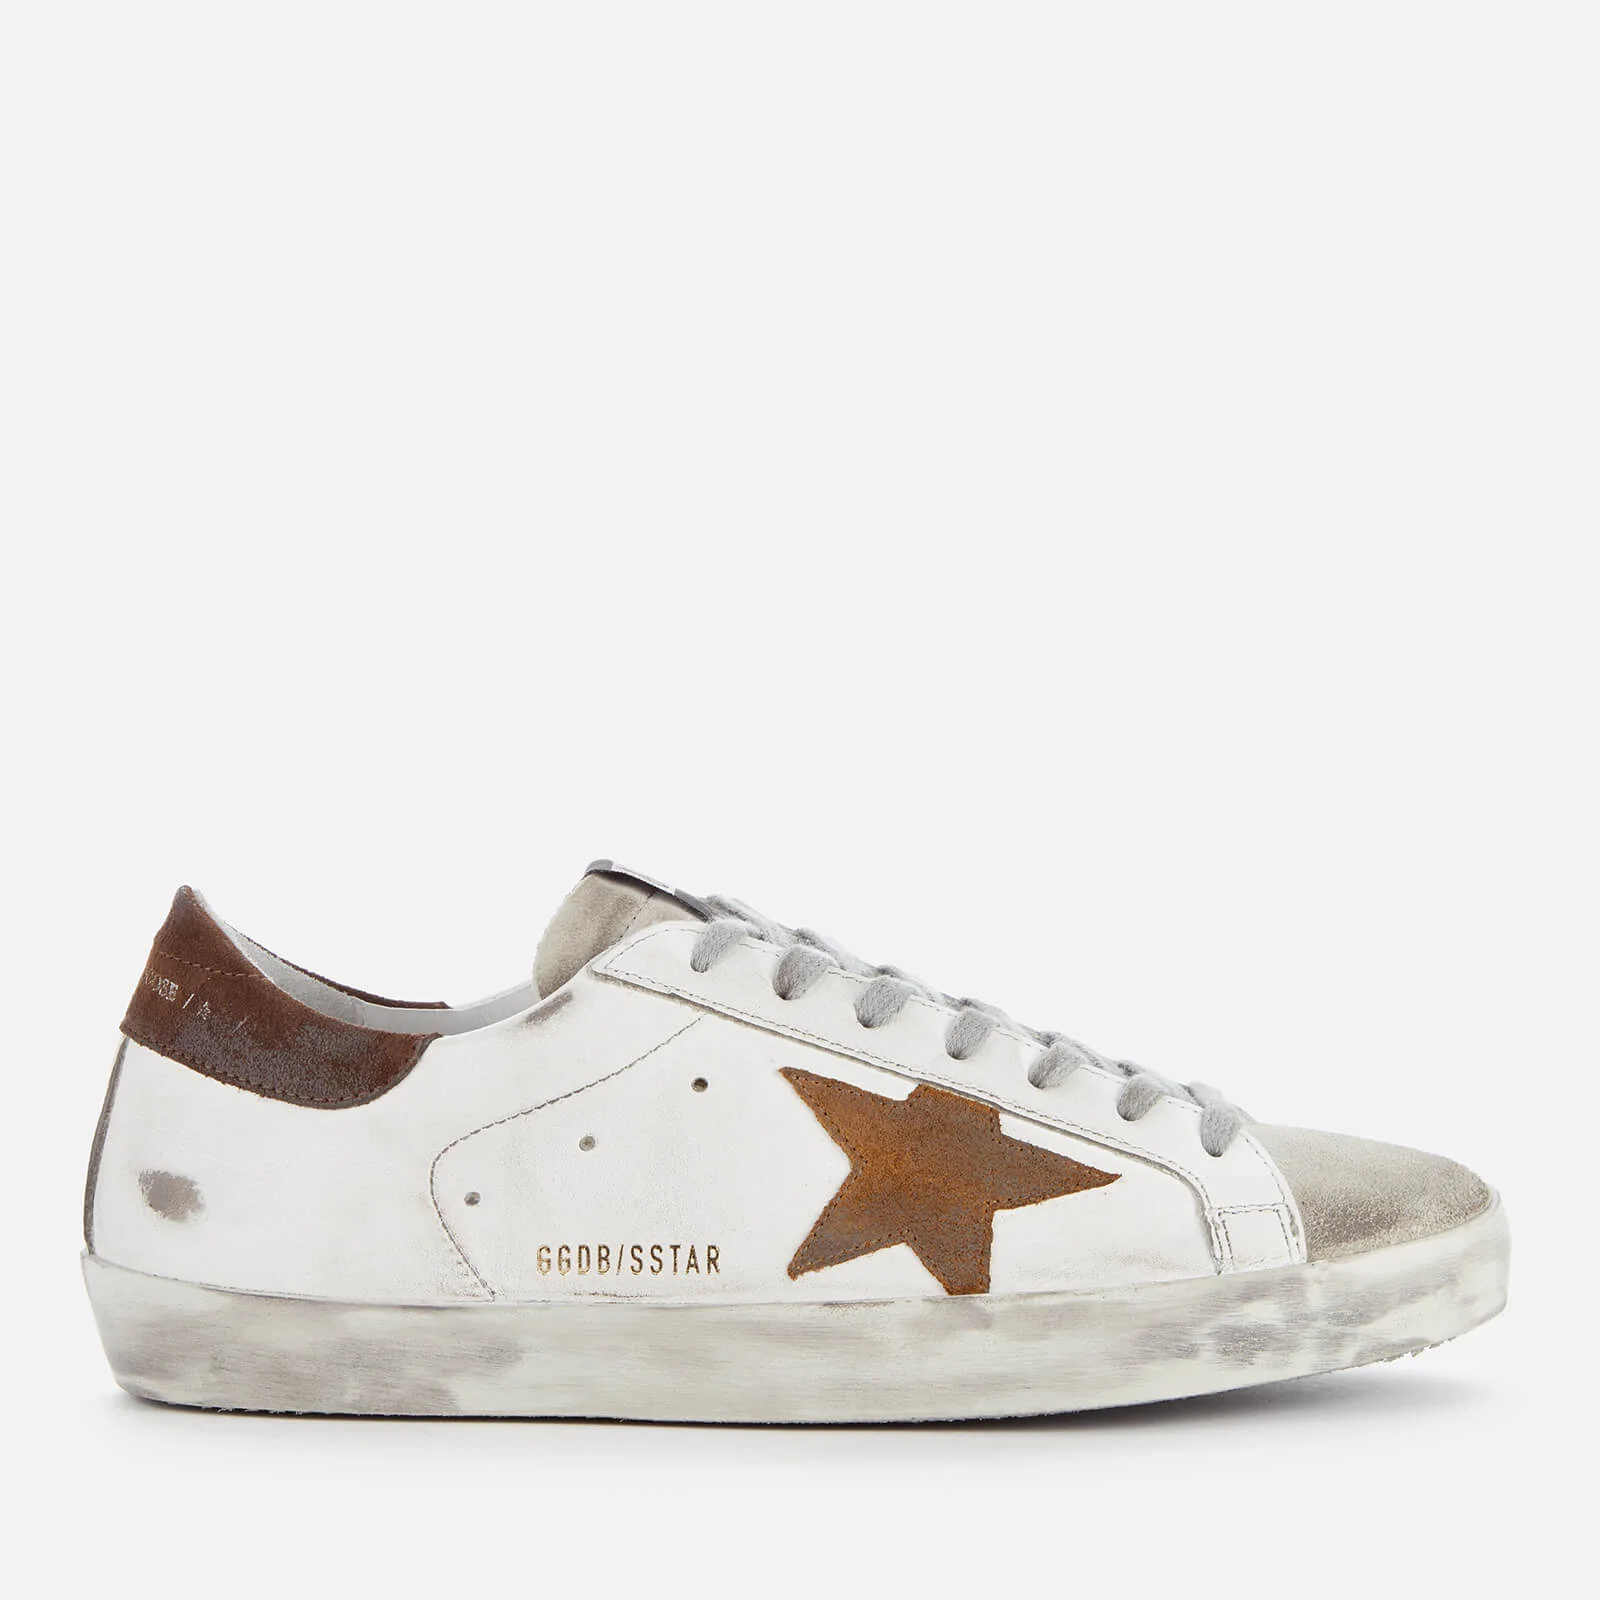 Golden Goose Men's Superstar Leather Trainers - White/Brown Suede Star Image 1